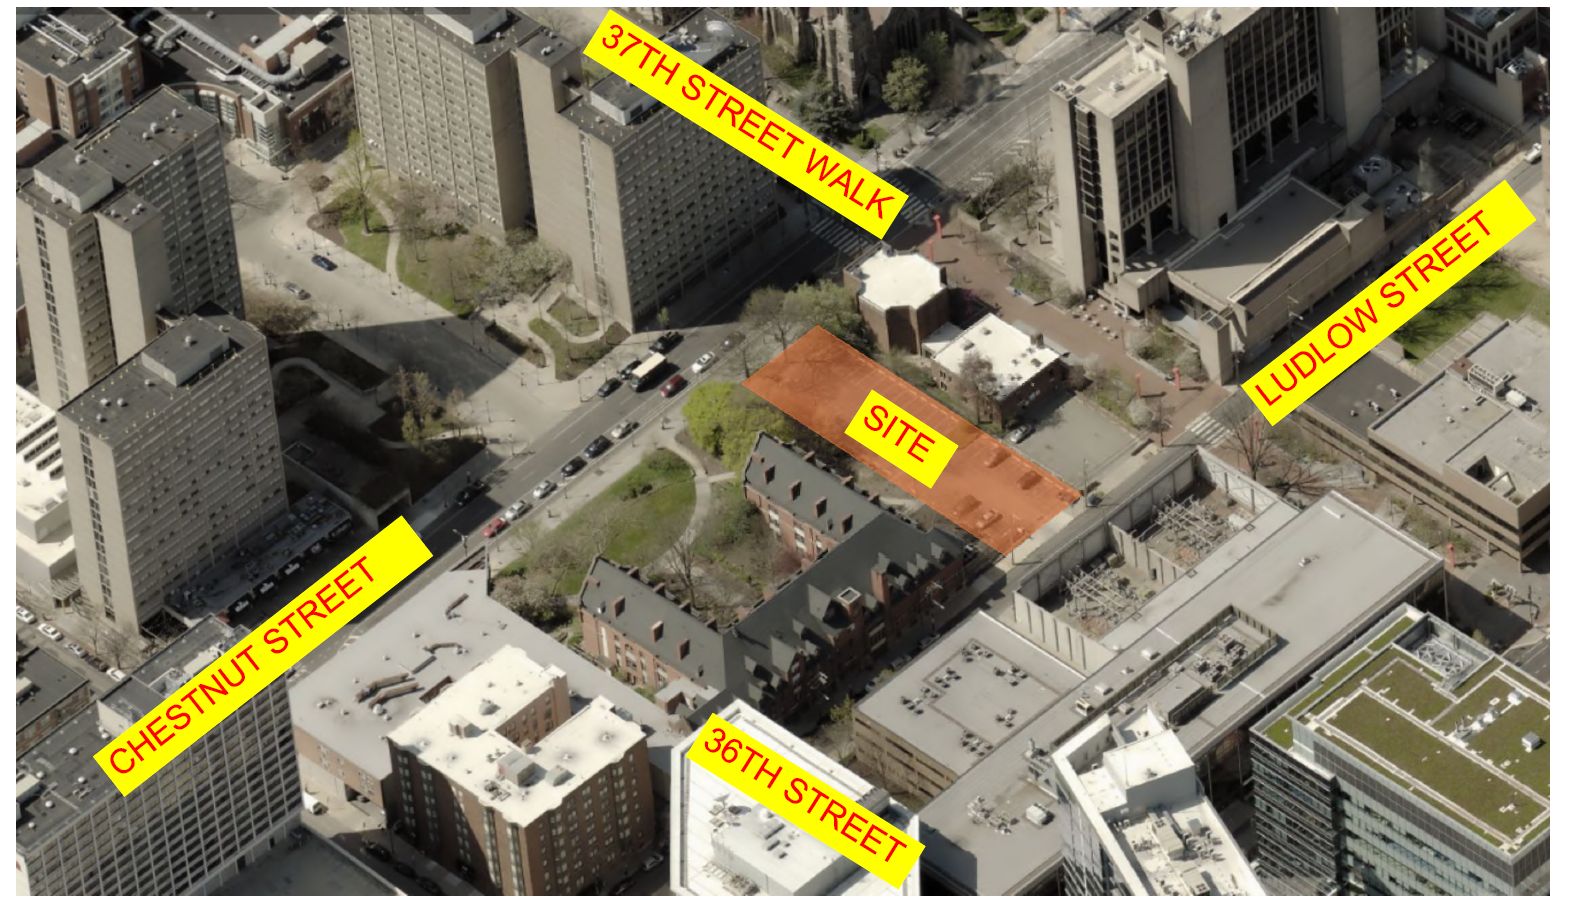 The Mark at 3615 Chestnut Street. Site diagram. Credit: BKV Group via the Civic Design Review